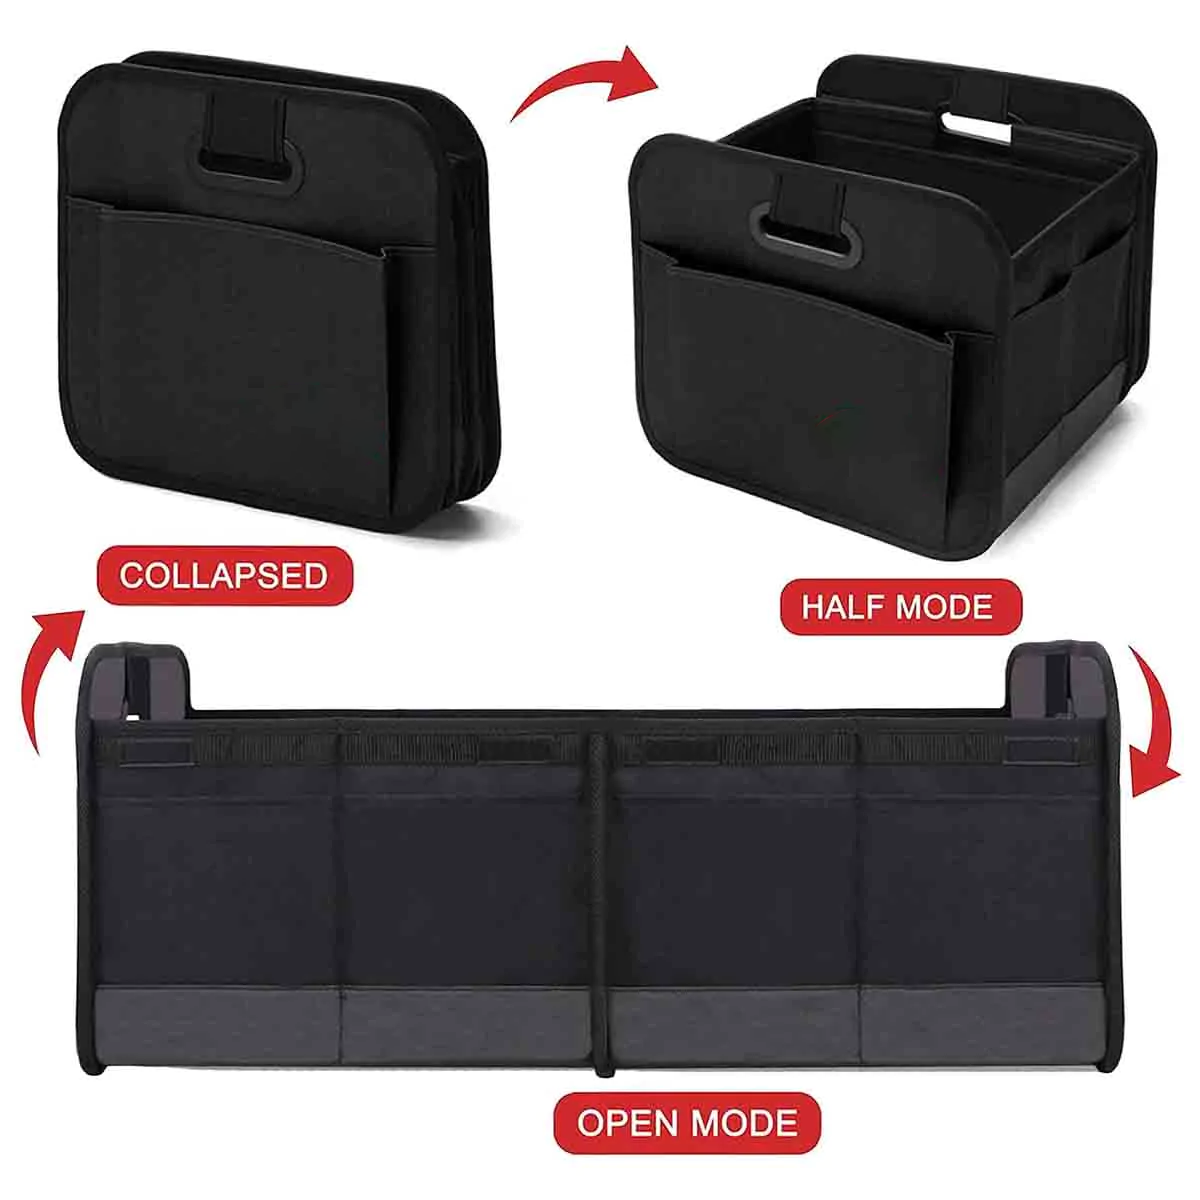 Custom Text For Car Trunk Organizer Storage, Compatible with All Cars, Reinforced Handles, Collapsible Multi, Compartment Car Organizers, Foldable and Waterproof, 600D Oxford Polyester FD12995